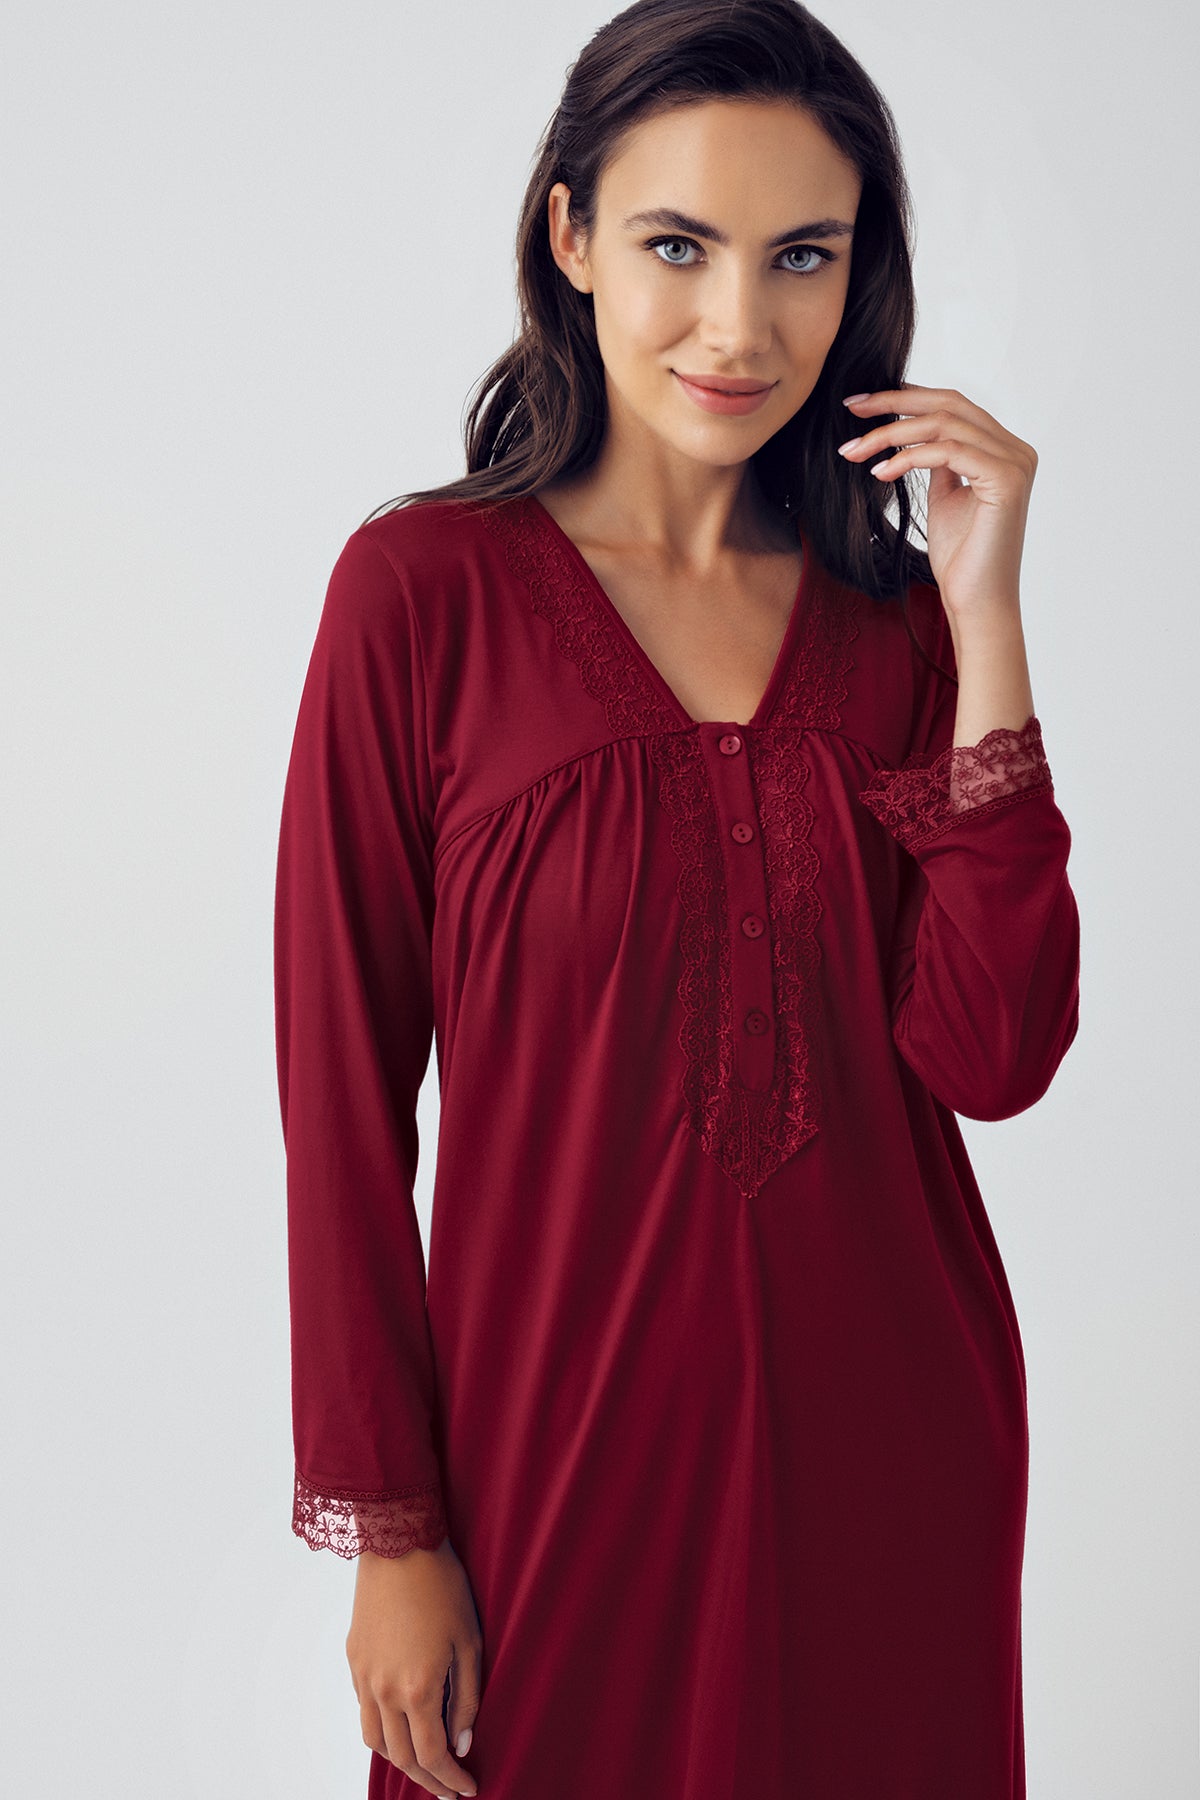 Shopymommy 15120 Lace Sleeve Plus Size Maternity & Nursing Nightgown Claret Red